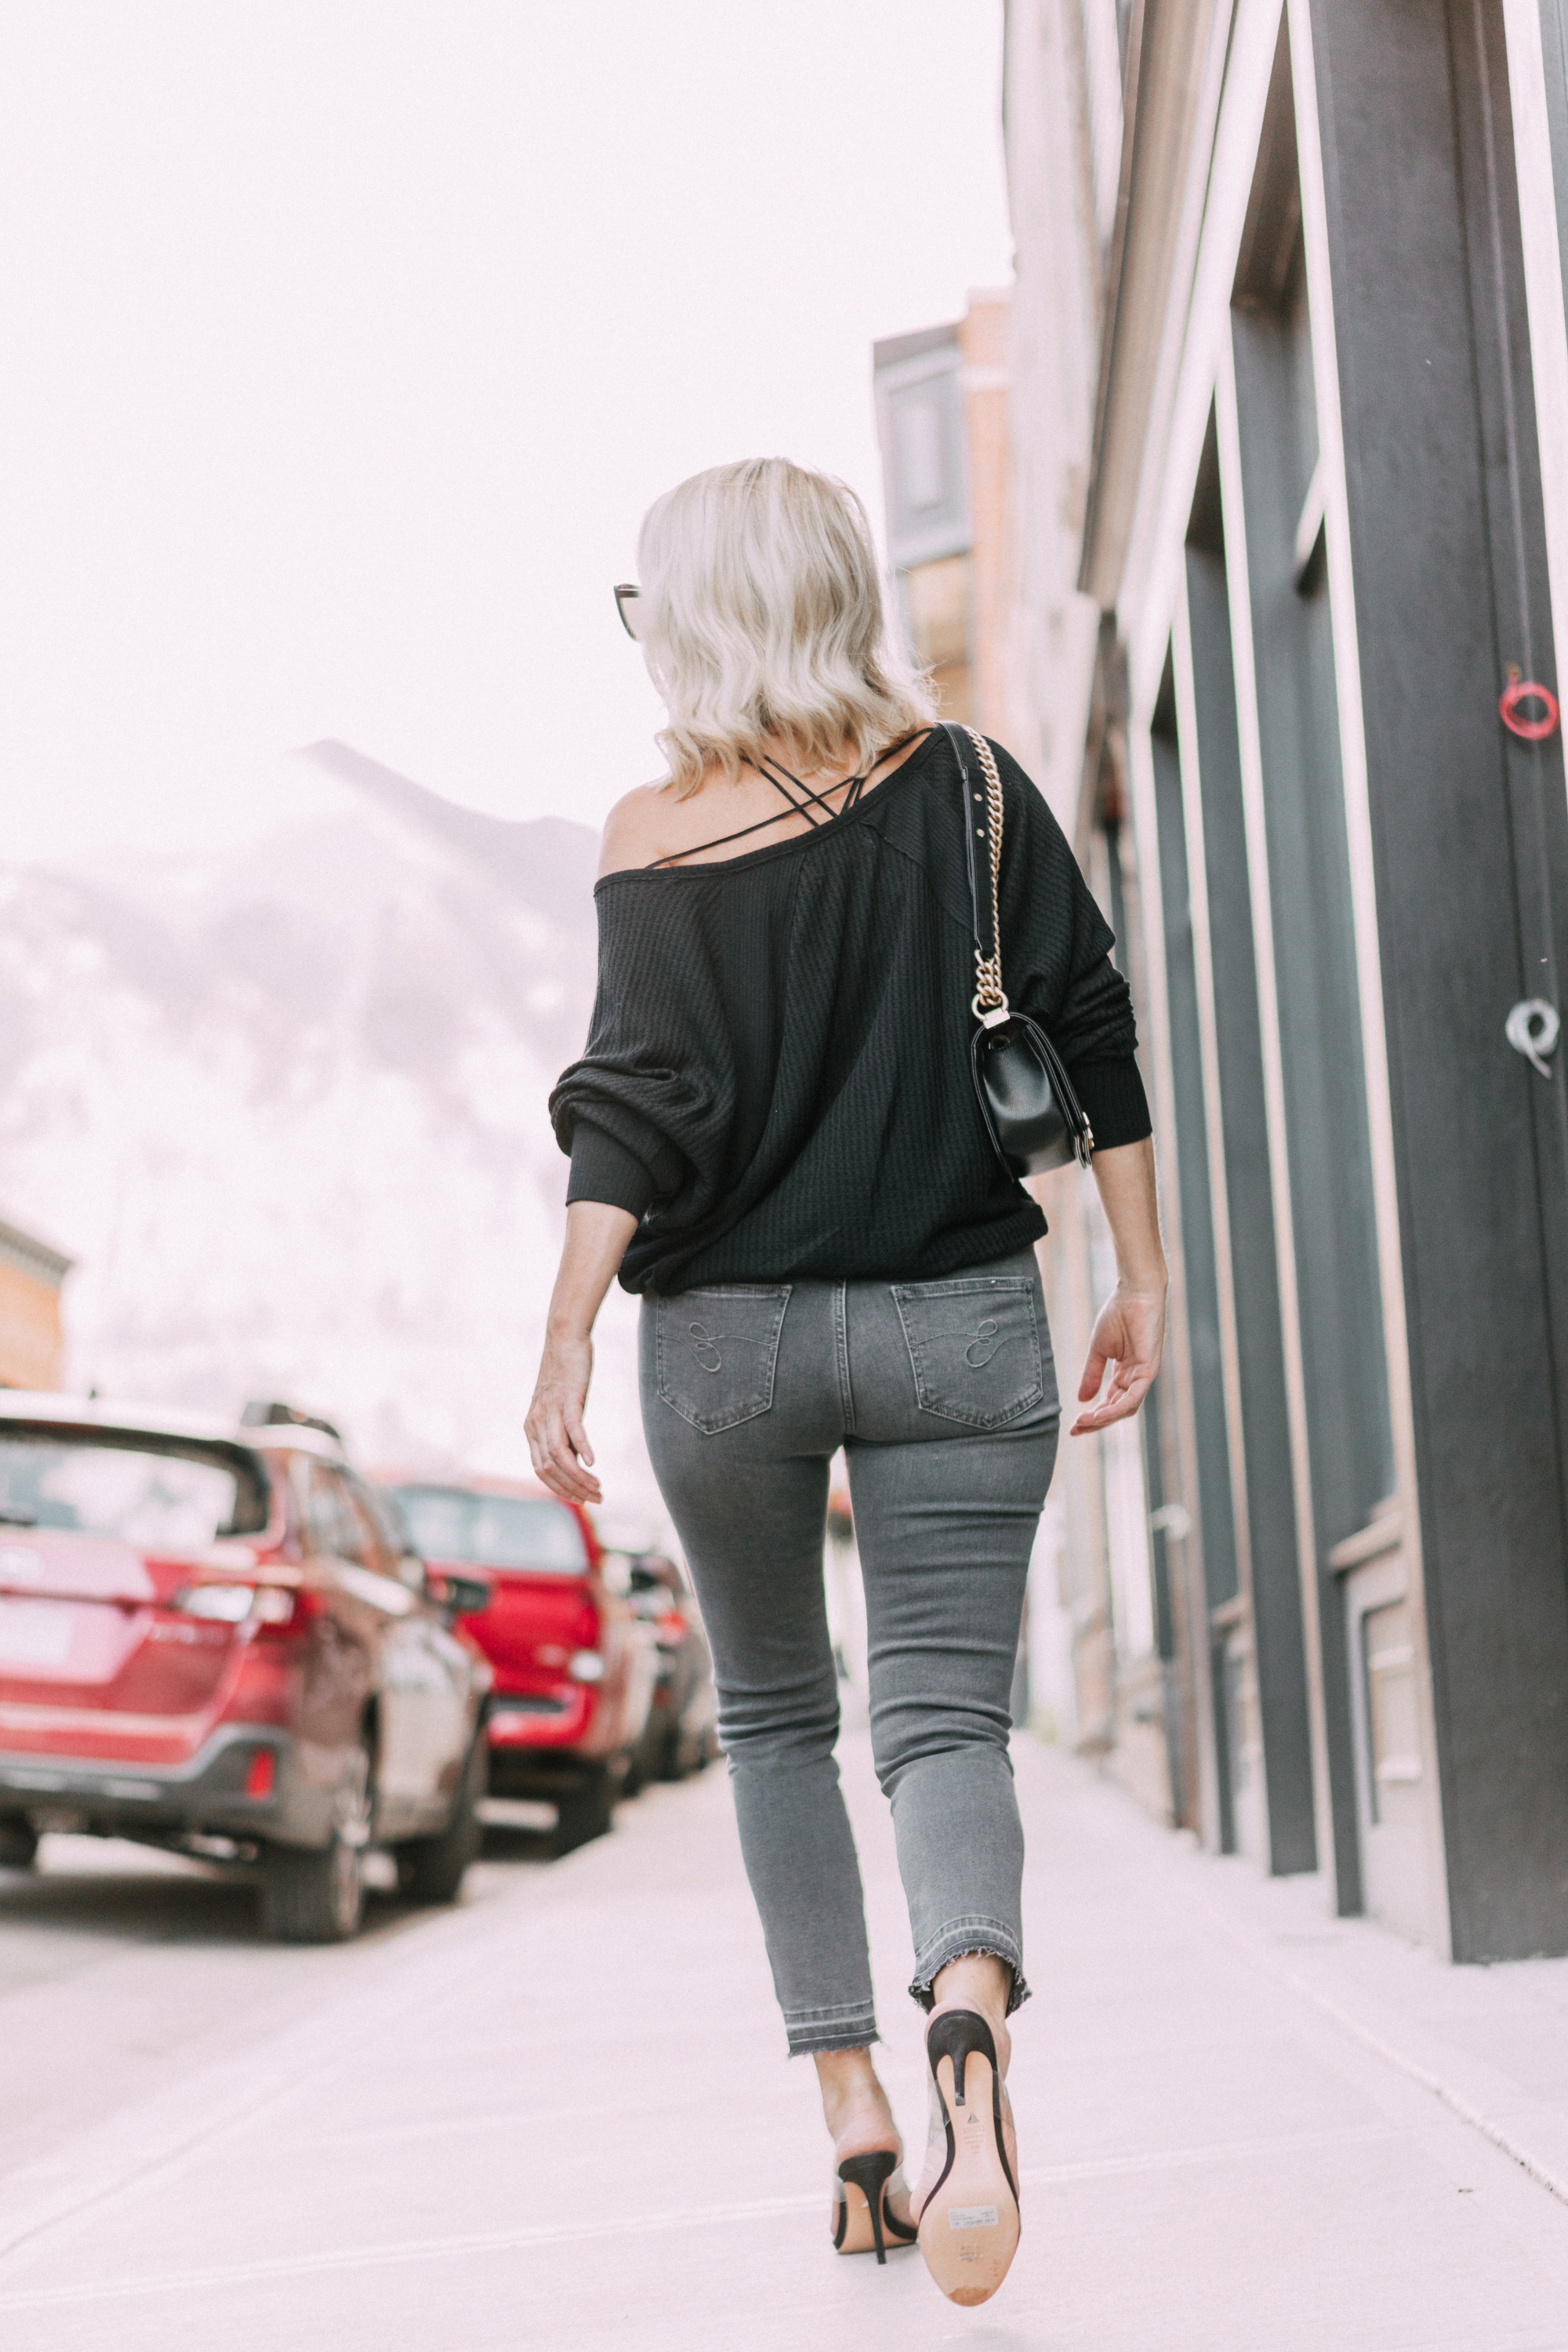 Striped Jeans, Fashion blogger Erin Busbee of BusbeeStyle.com wearing black patent striped jeans by Escada, waffle knit tee by Free People, bralette by Free People, heels by Schutz, and Chanel bag from Bloomingdale's in Telluride, CO